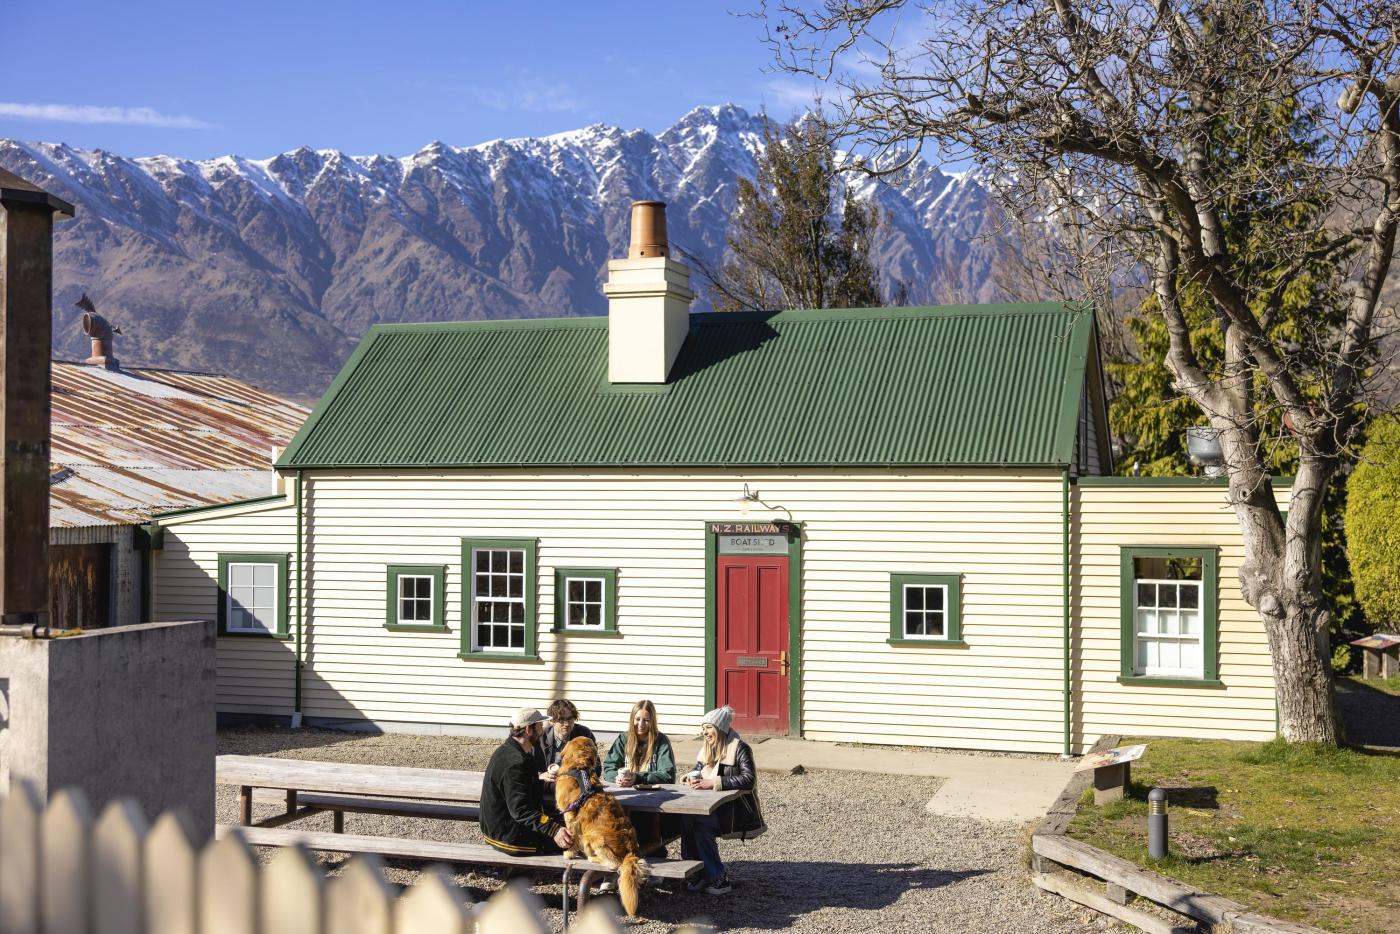 People eating food in an outside courtyard infront of a cute cottage cafe with mountains in the background